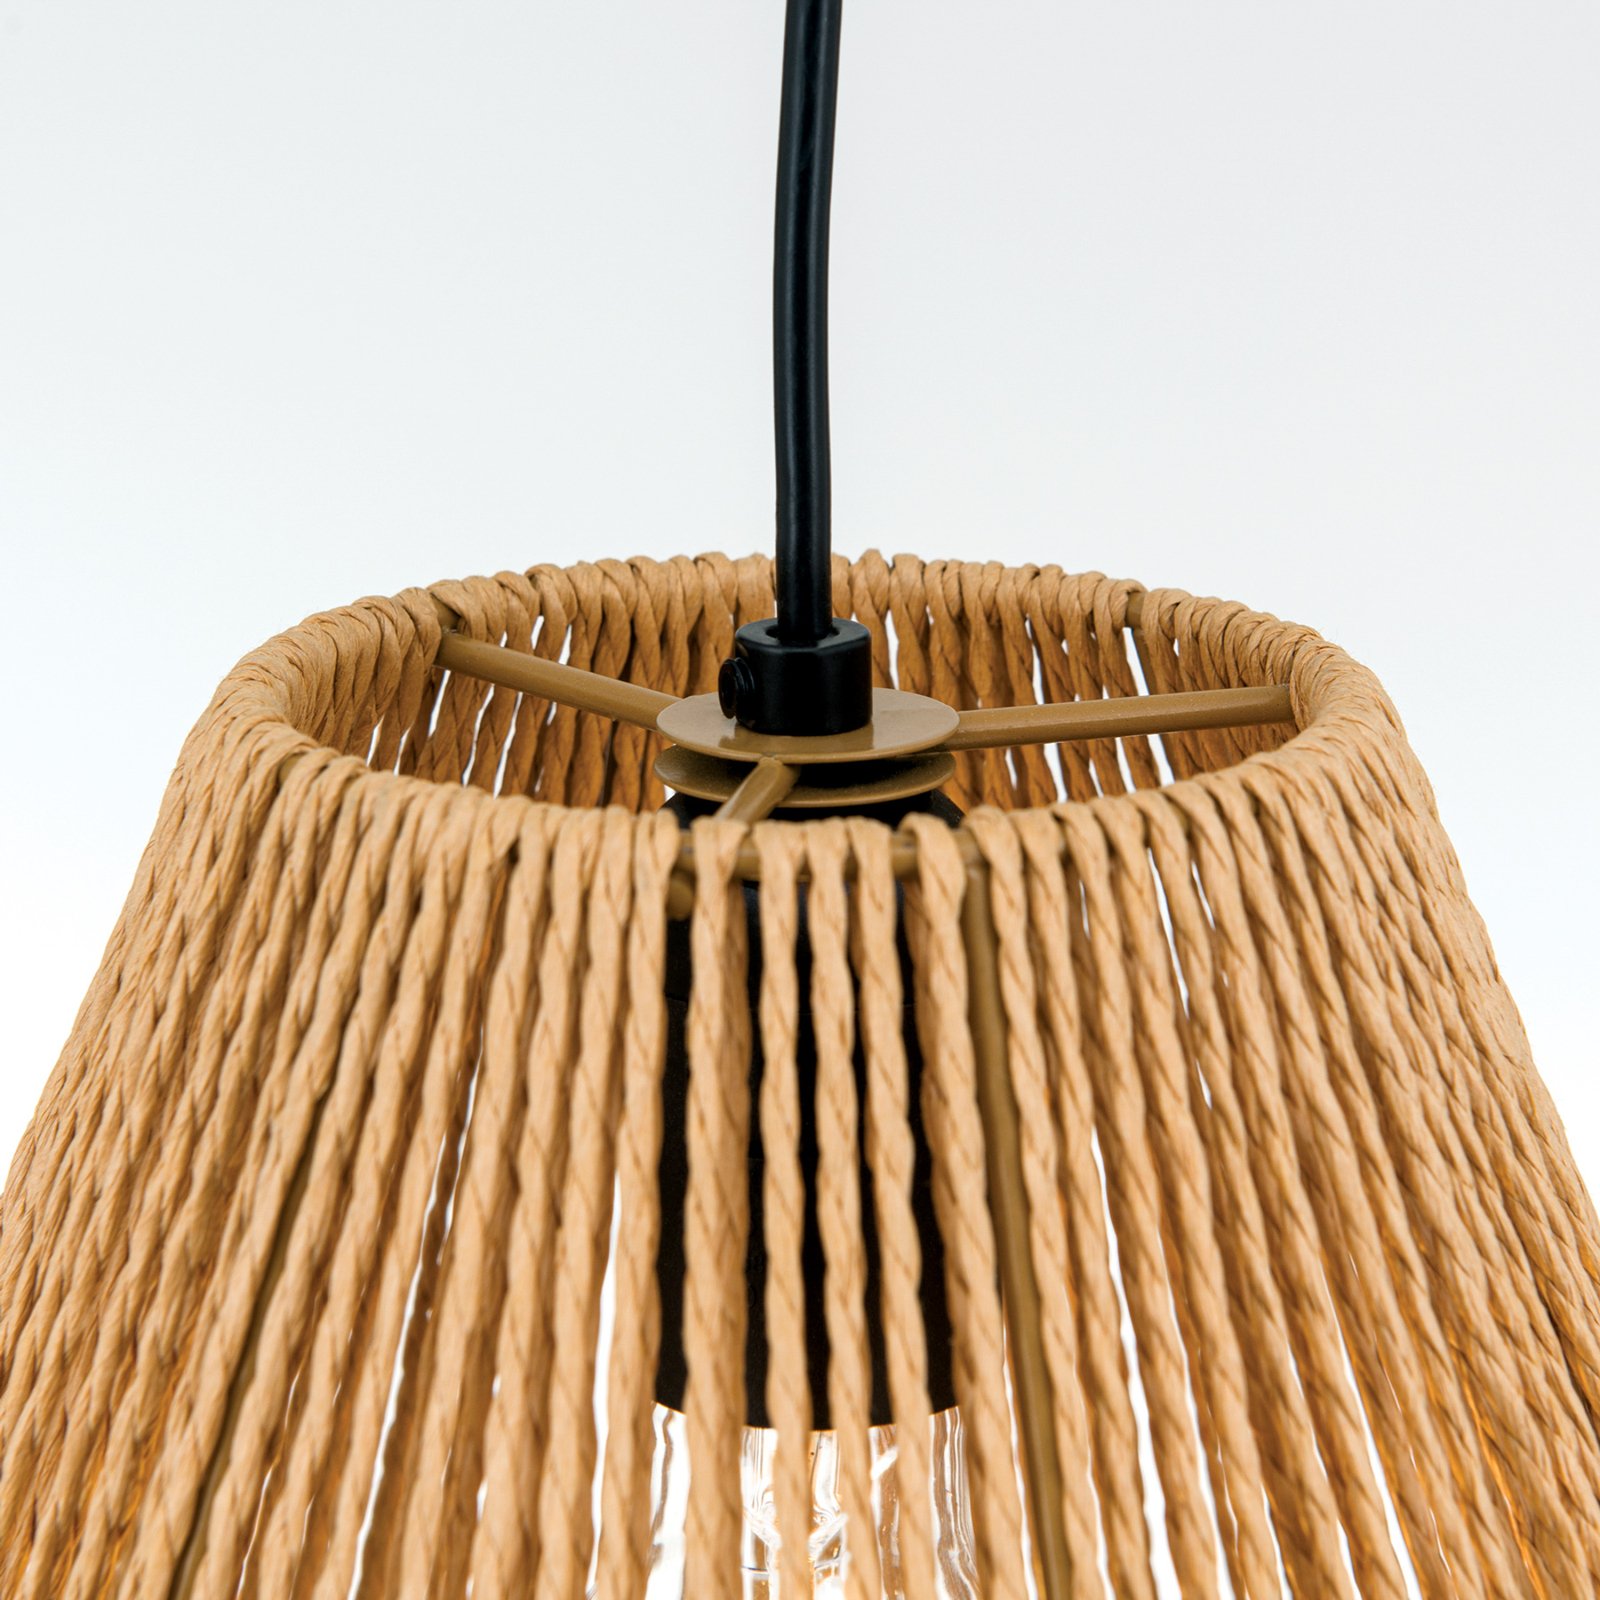 Jungle pendant light with a lampshade of hemp cord